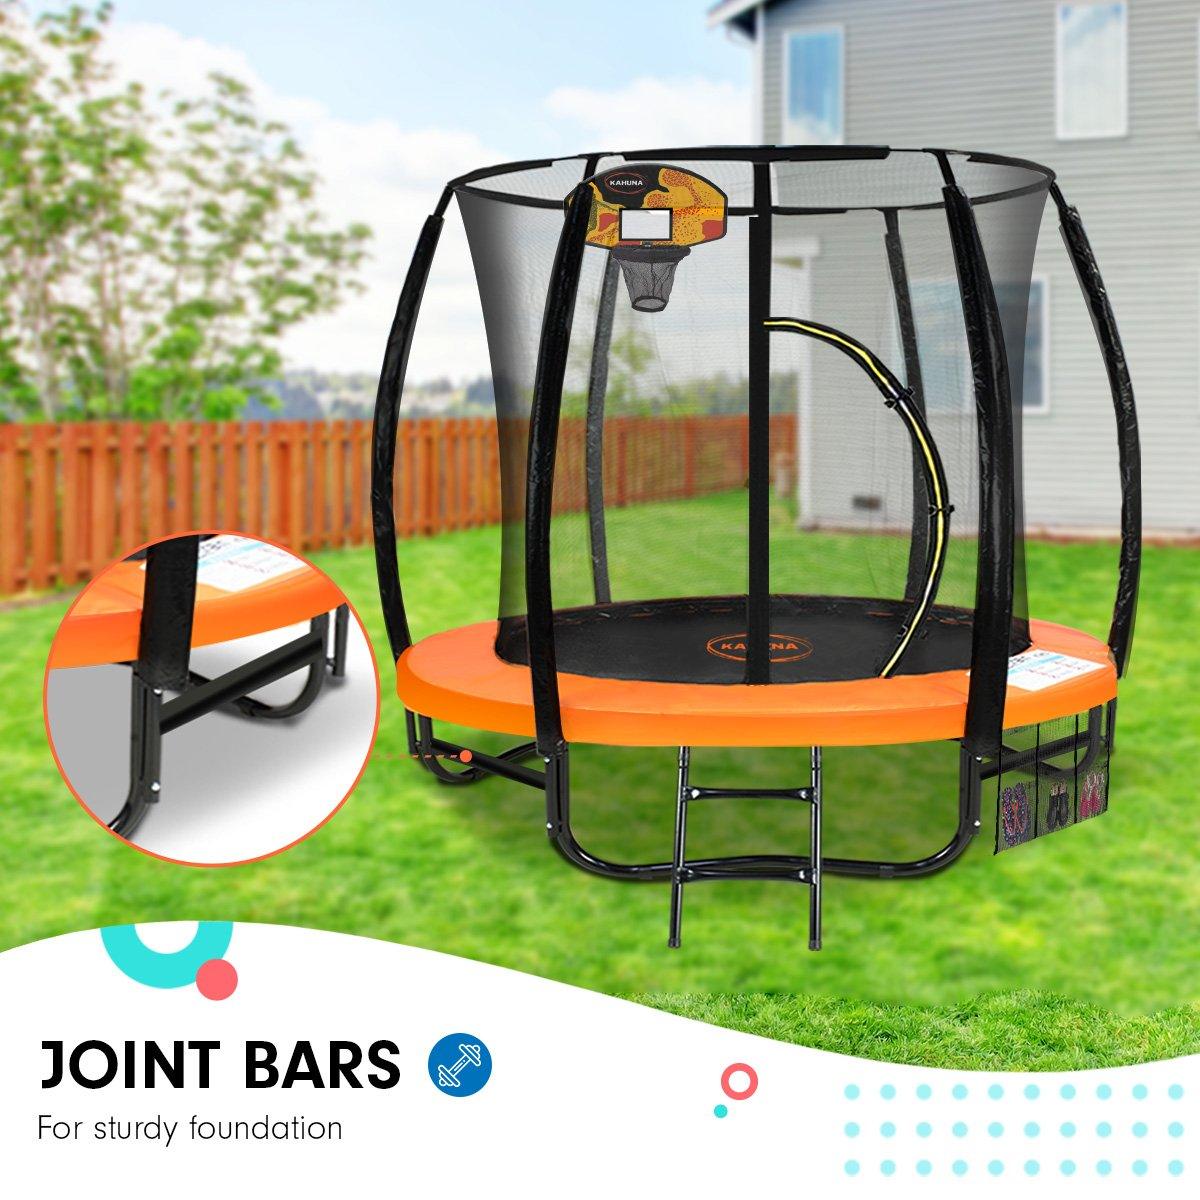 Buy Kahuna 8ft Outdoor Orange Trampoline For Kids And Children Suited For Fitness Exercise Gymnastics With Safety Enclosure Basketball Hoop Set discounted | Products On Sale Australia